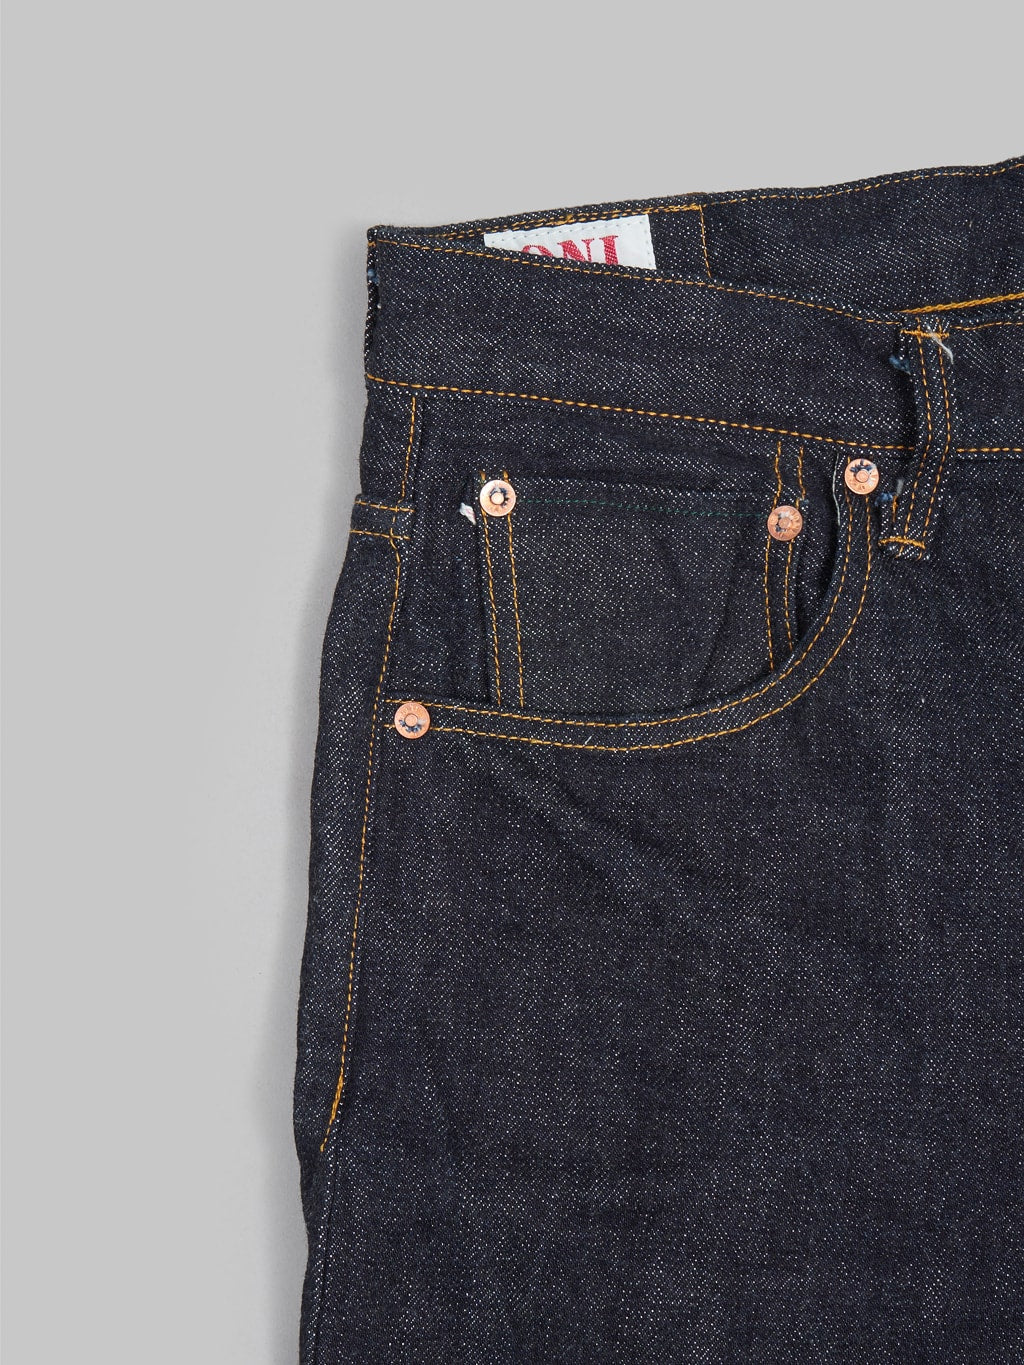 ONI Denim 200 Low Tension 15oz Wide Straight Jeans coin pocket